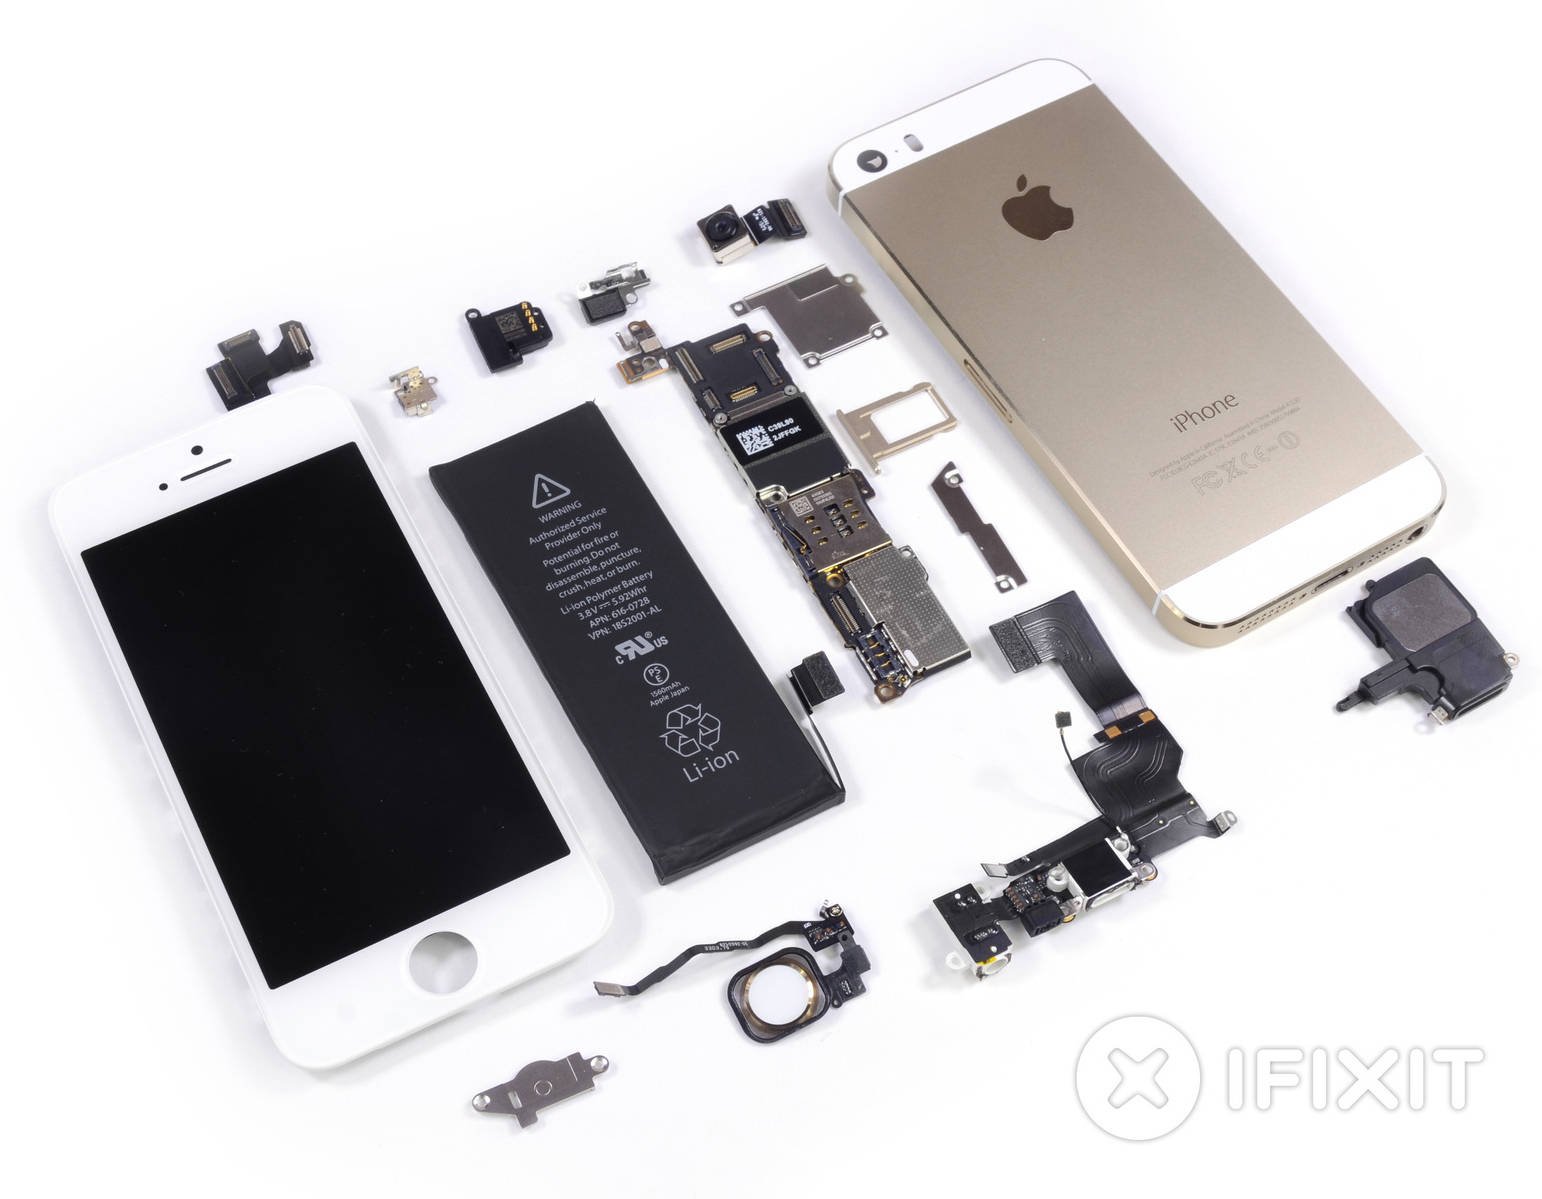 iPhone 5s Review: Apple’s Latest Smartphone Goes For (And Gets) The ...